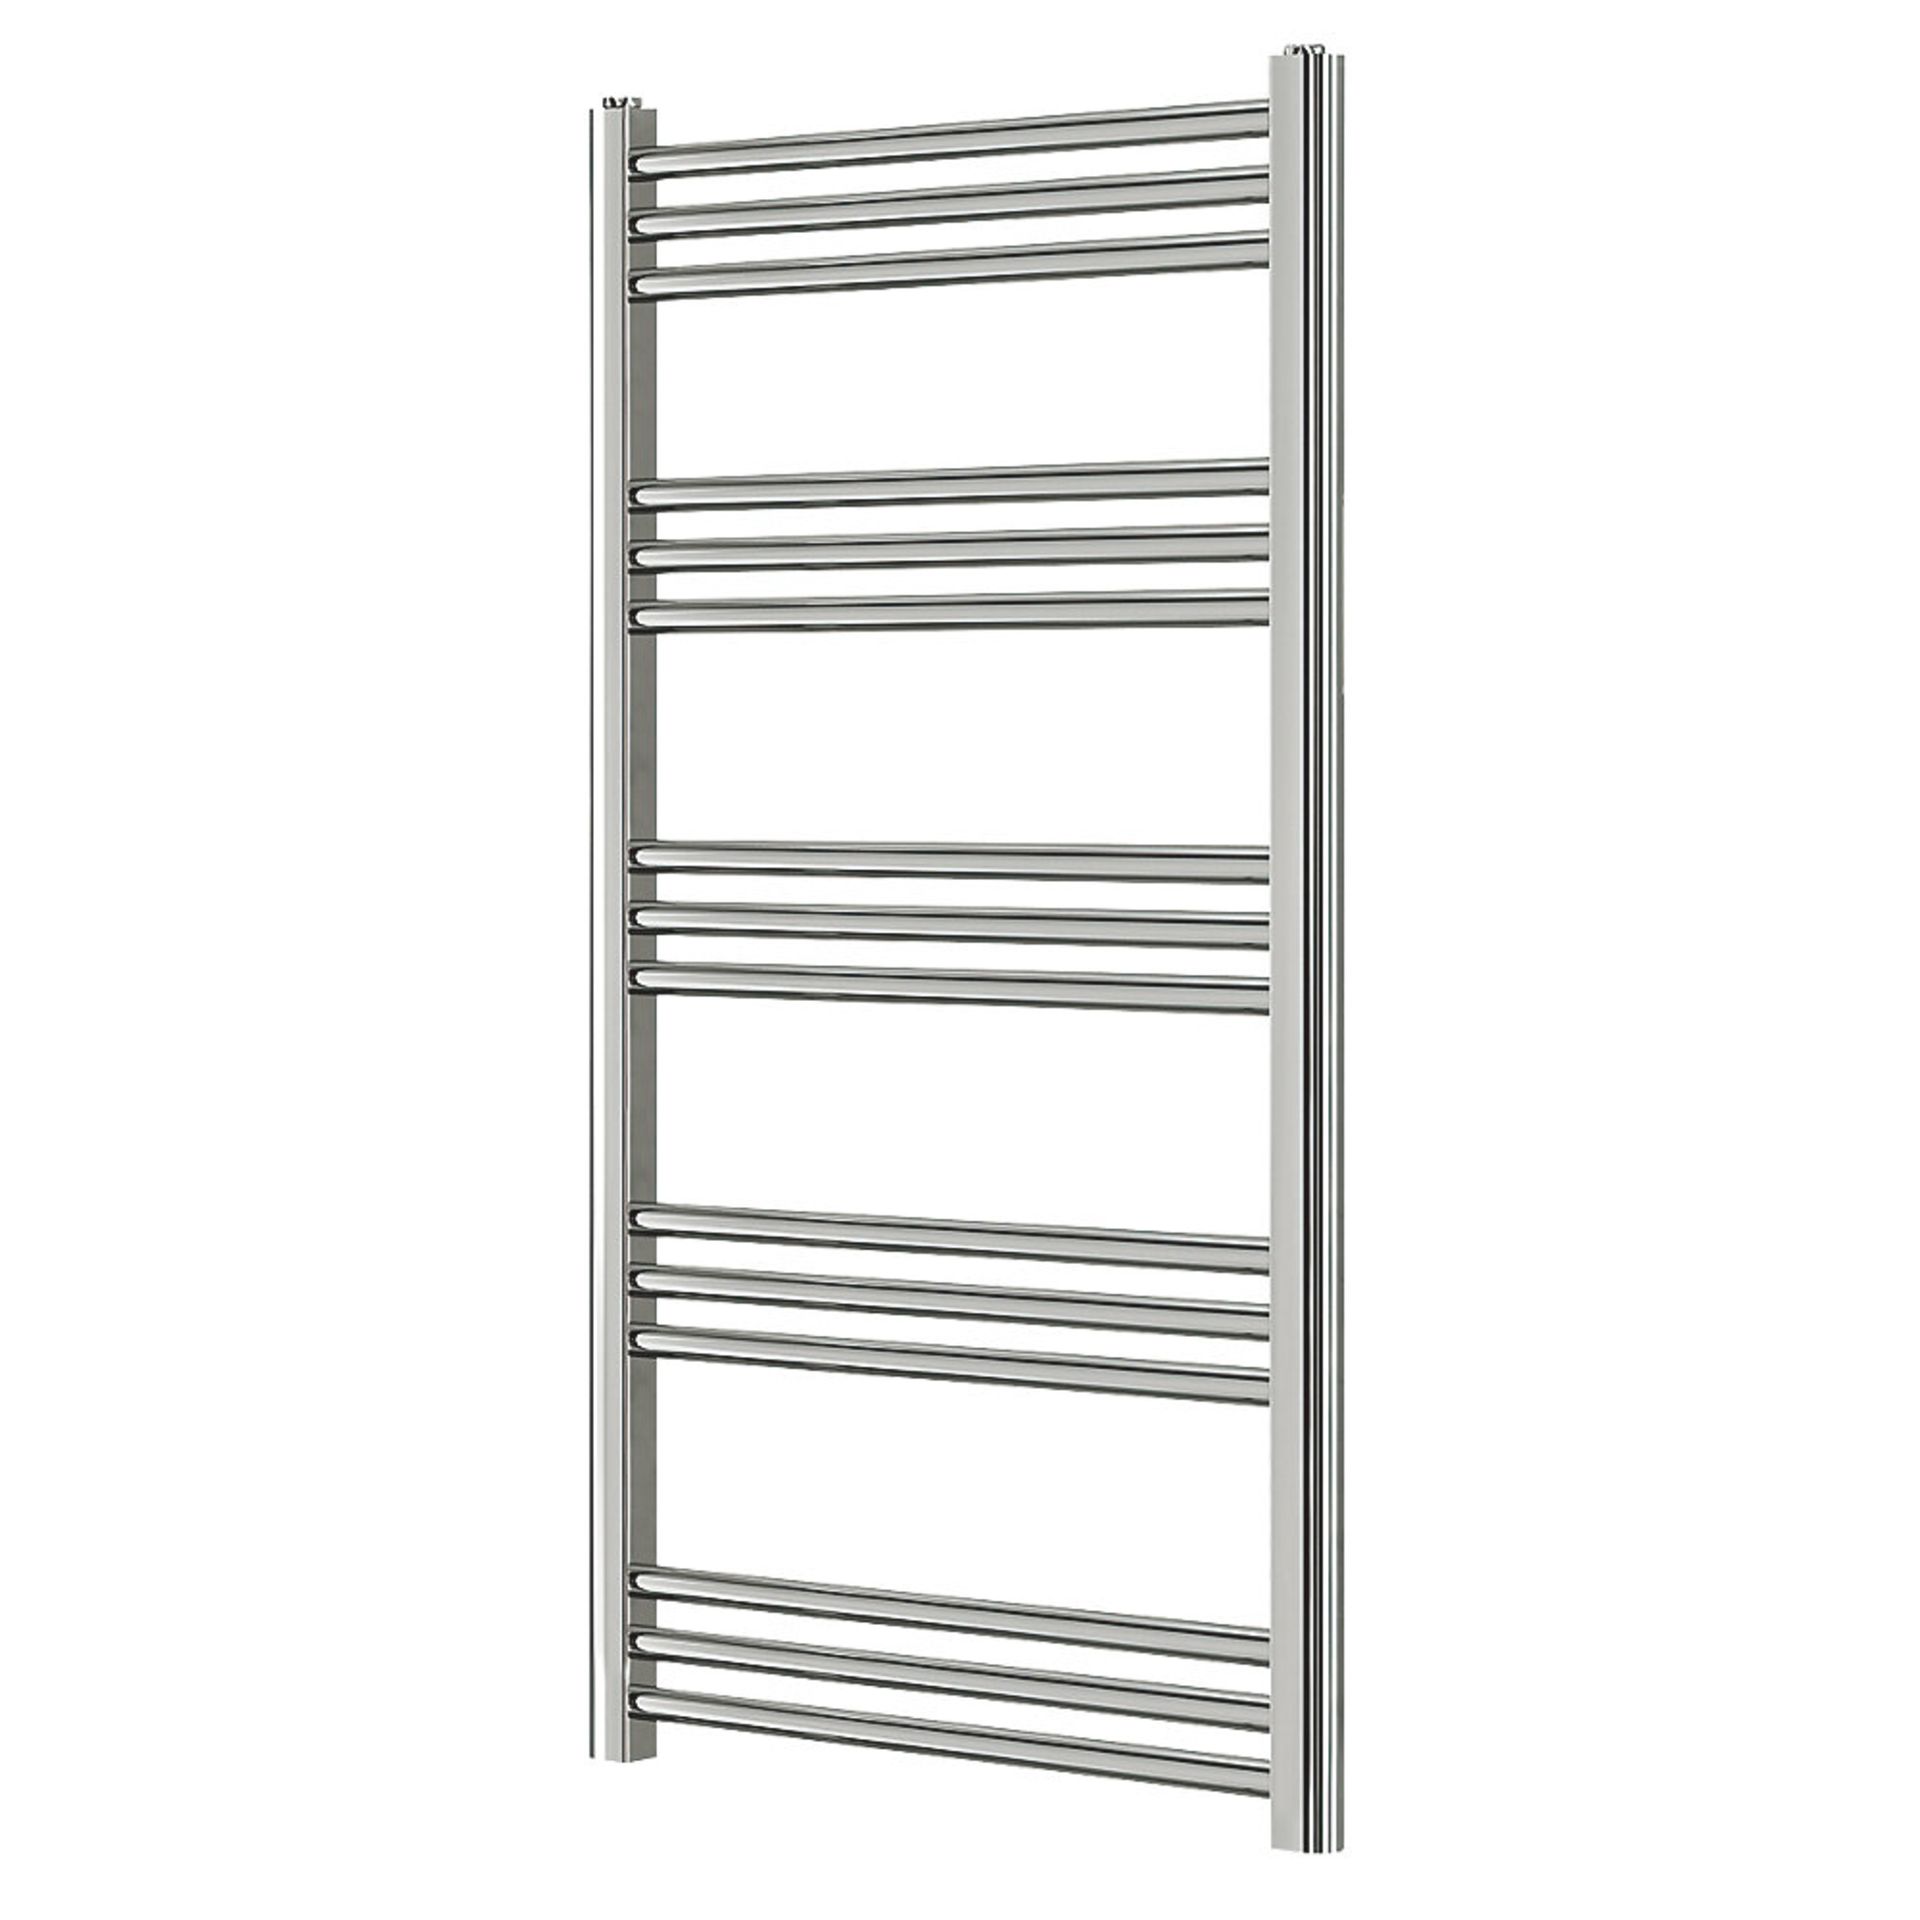 (SA149) 1100 X 500MM TOWEL RADIATOR CHROME. Mild steel construction with a gloss chrome finish. This - Image 4 of 7